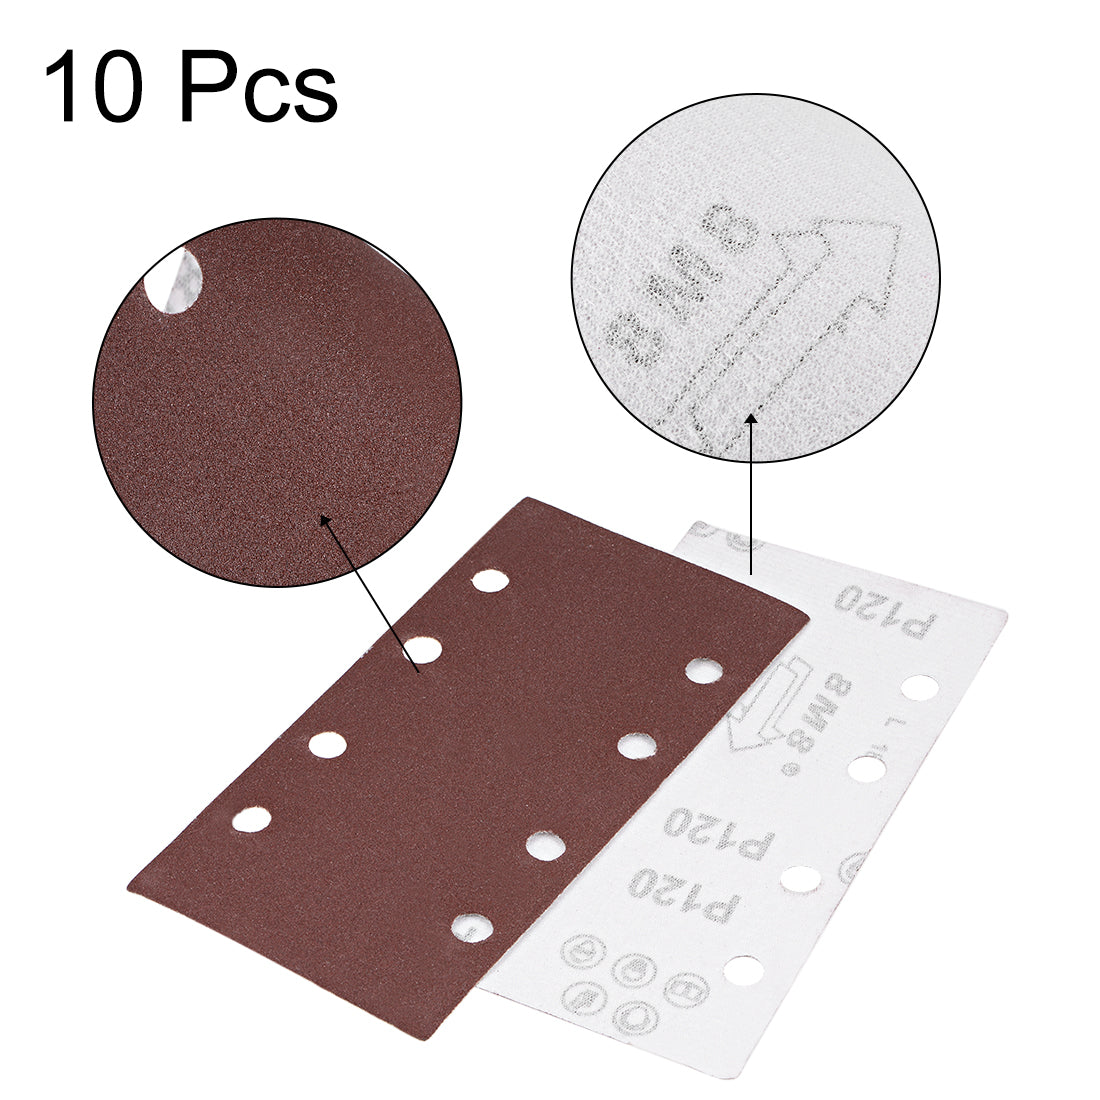 Uxcell Uxcell 100-Grits 8-Holes Hook and Loop Sanding Sheet, 7.3 x 3.6-inch Wet Dry Aluminum Oxide Sandpaper for Sander 10pcs